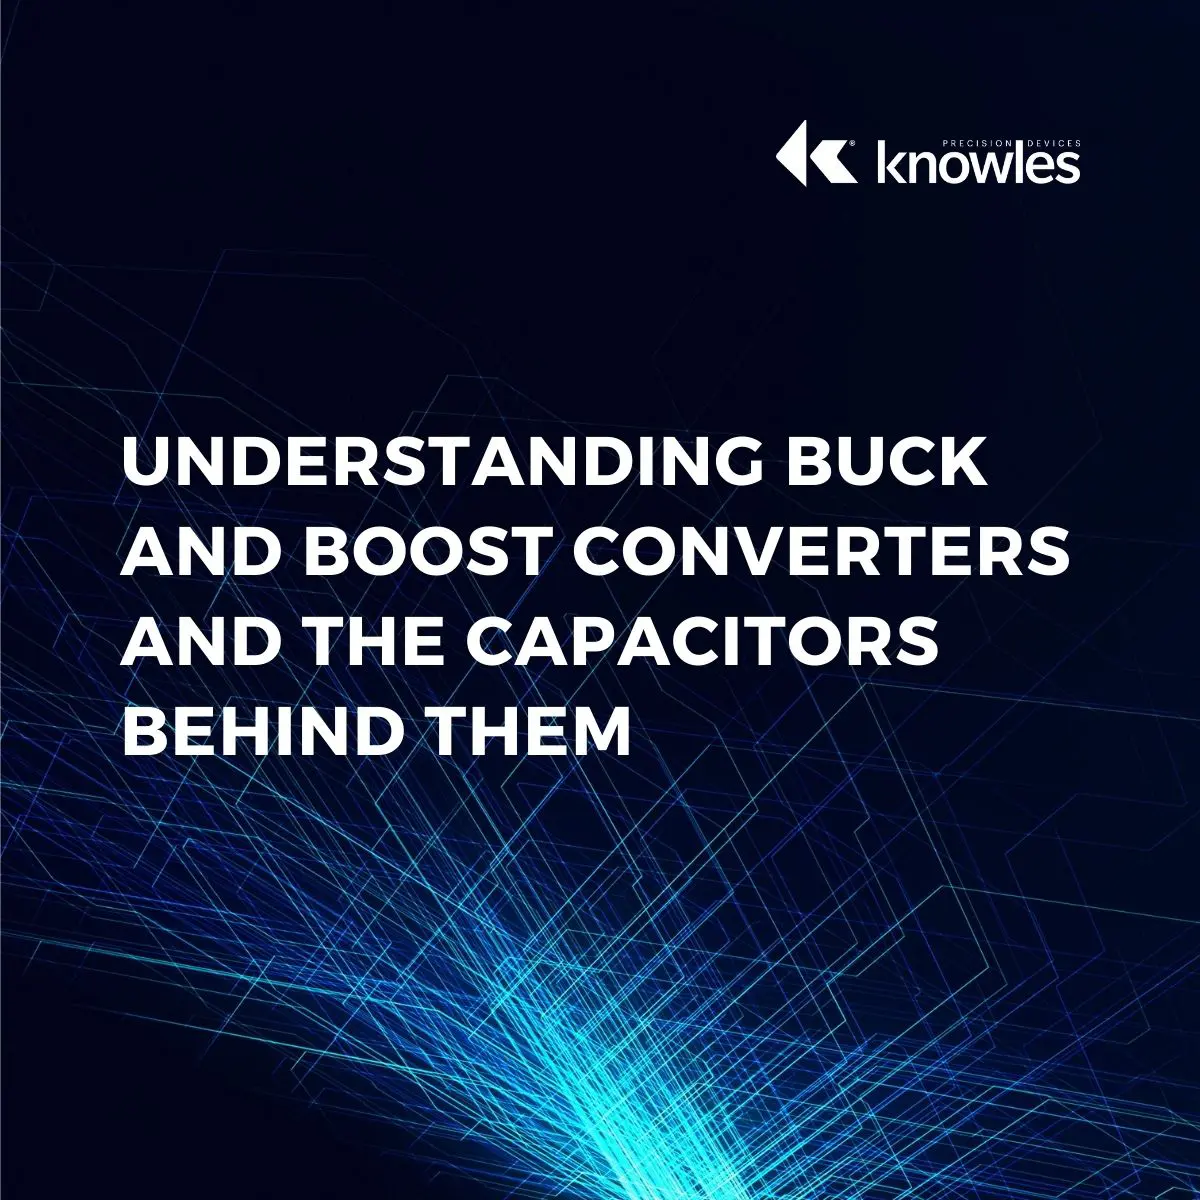 Understanding Buck and Boost Converters and the Capacitors Behind Them